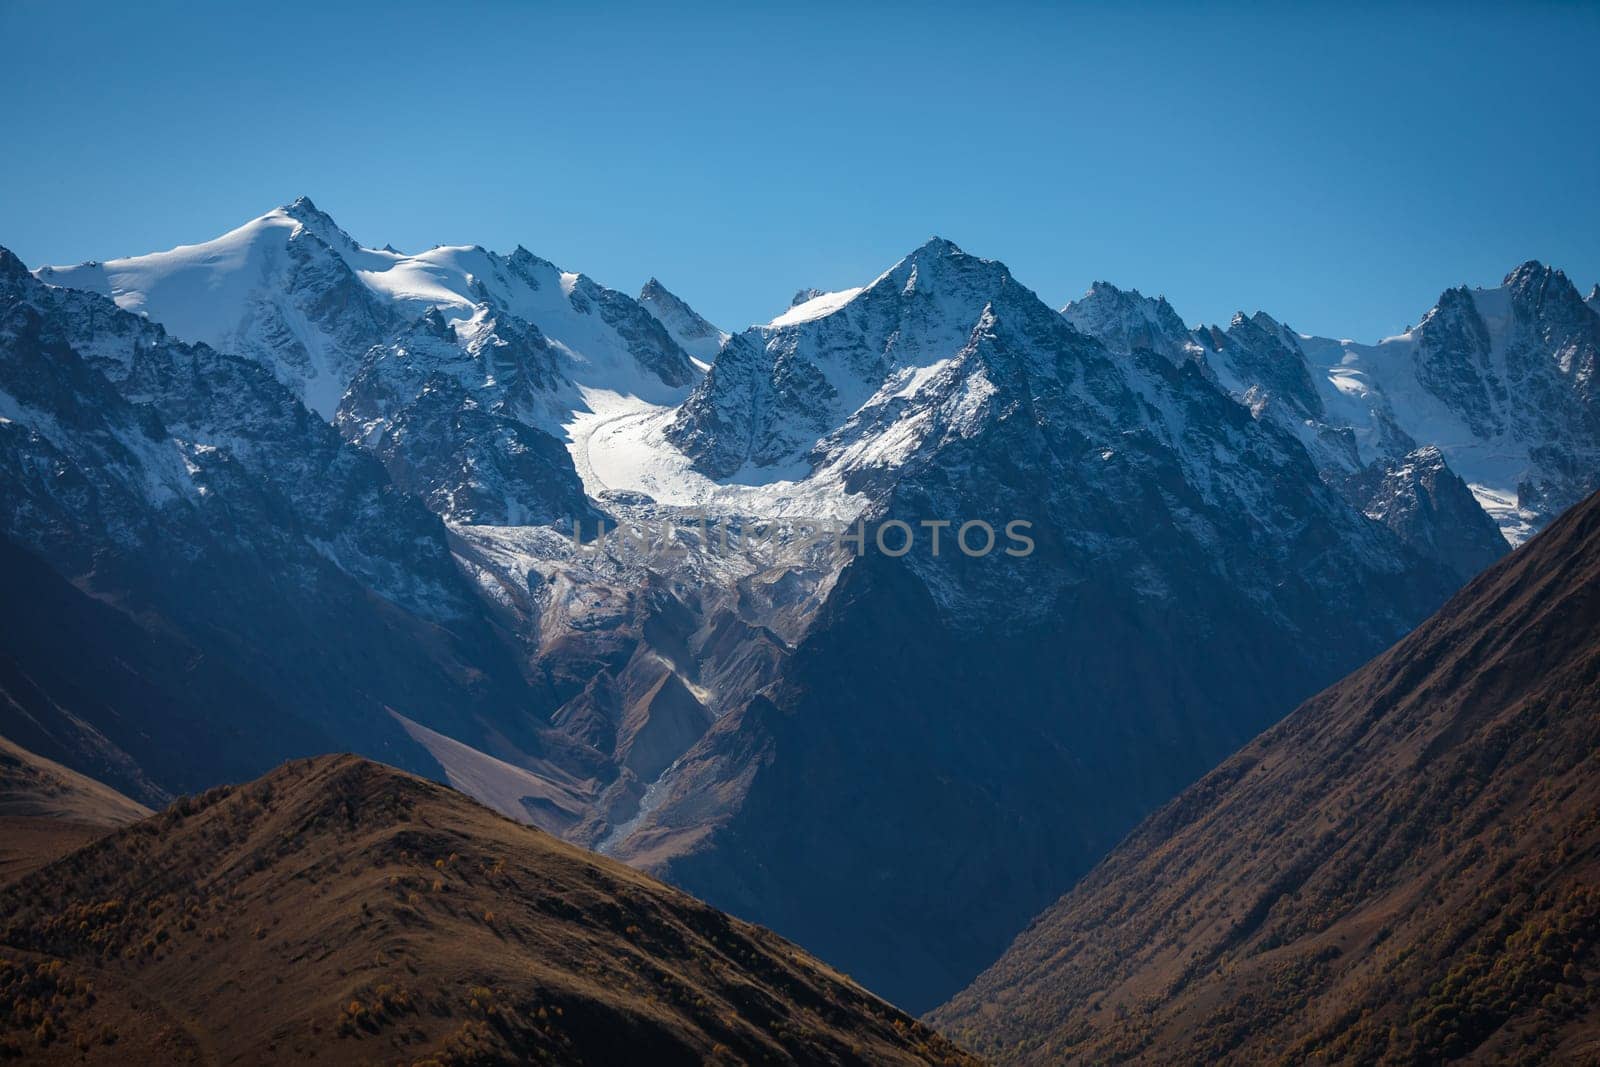 Snow-capped mountains rise majestically along the horizon by Yurich32